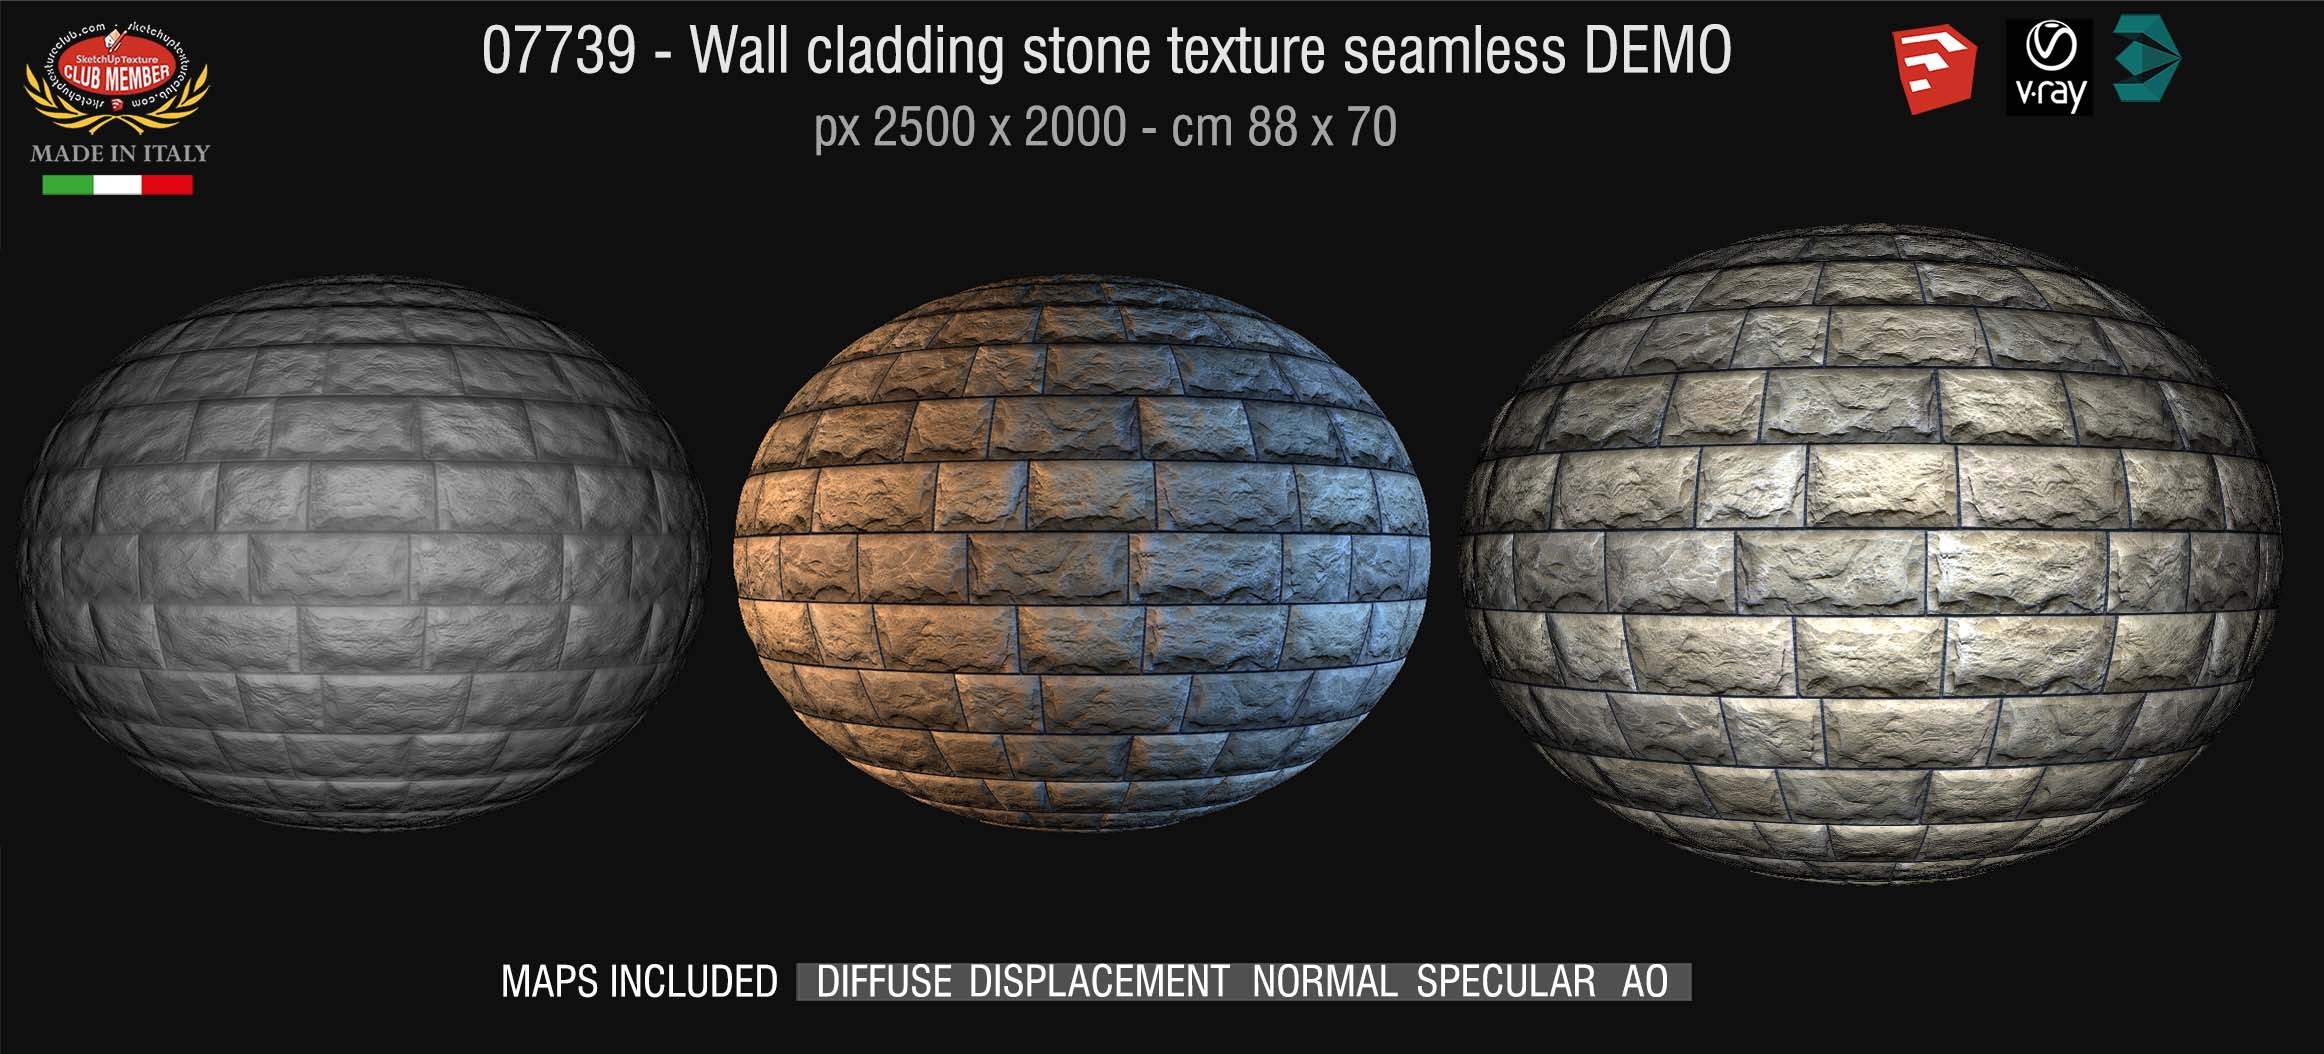 07739 HR Wall cladding stone texture + maps DEMO